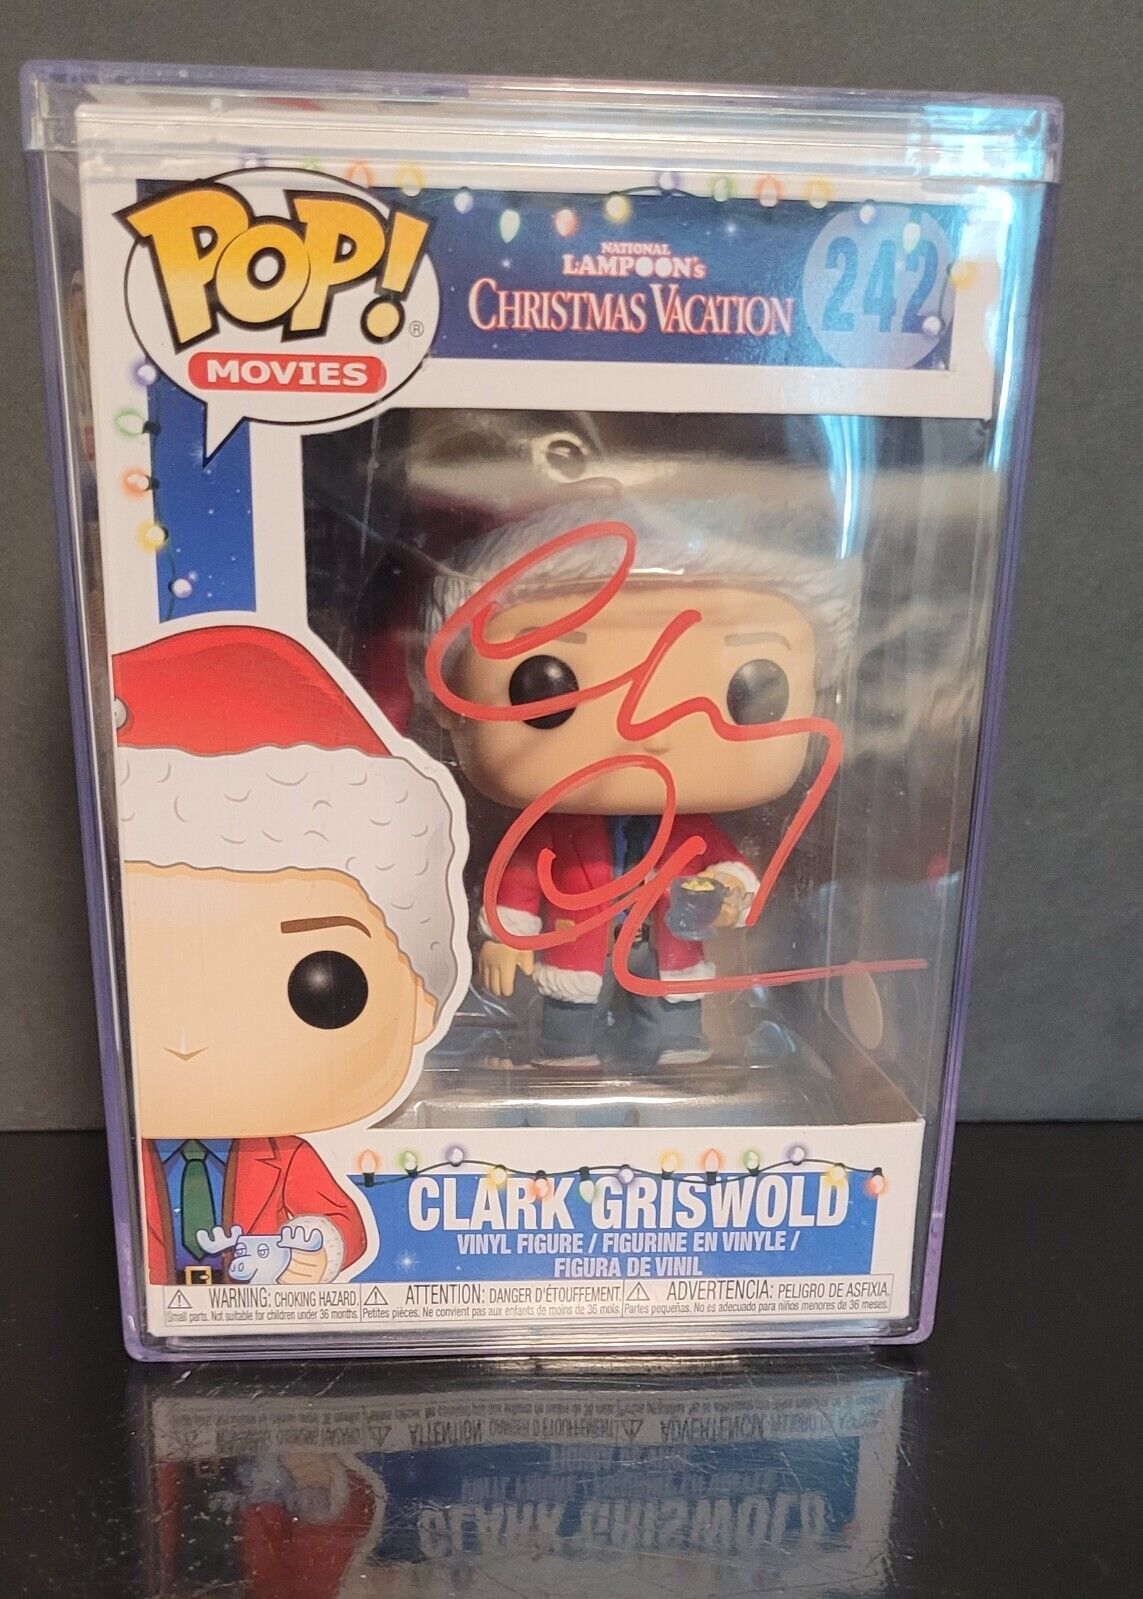 Chevy Chase Signed Clark Griswold Christmas Vacation Funko Pop Figure 242 (JSA)